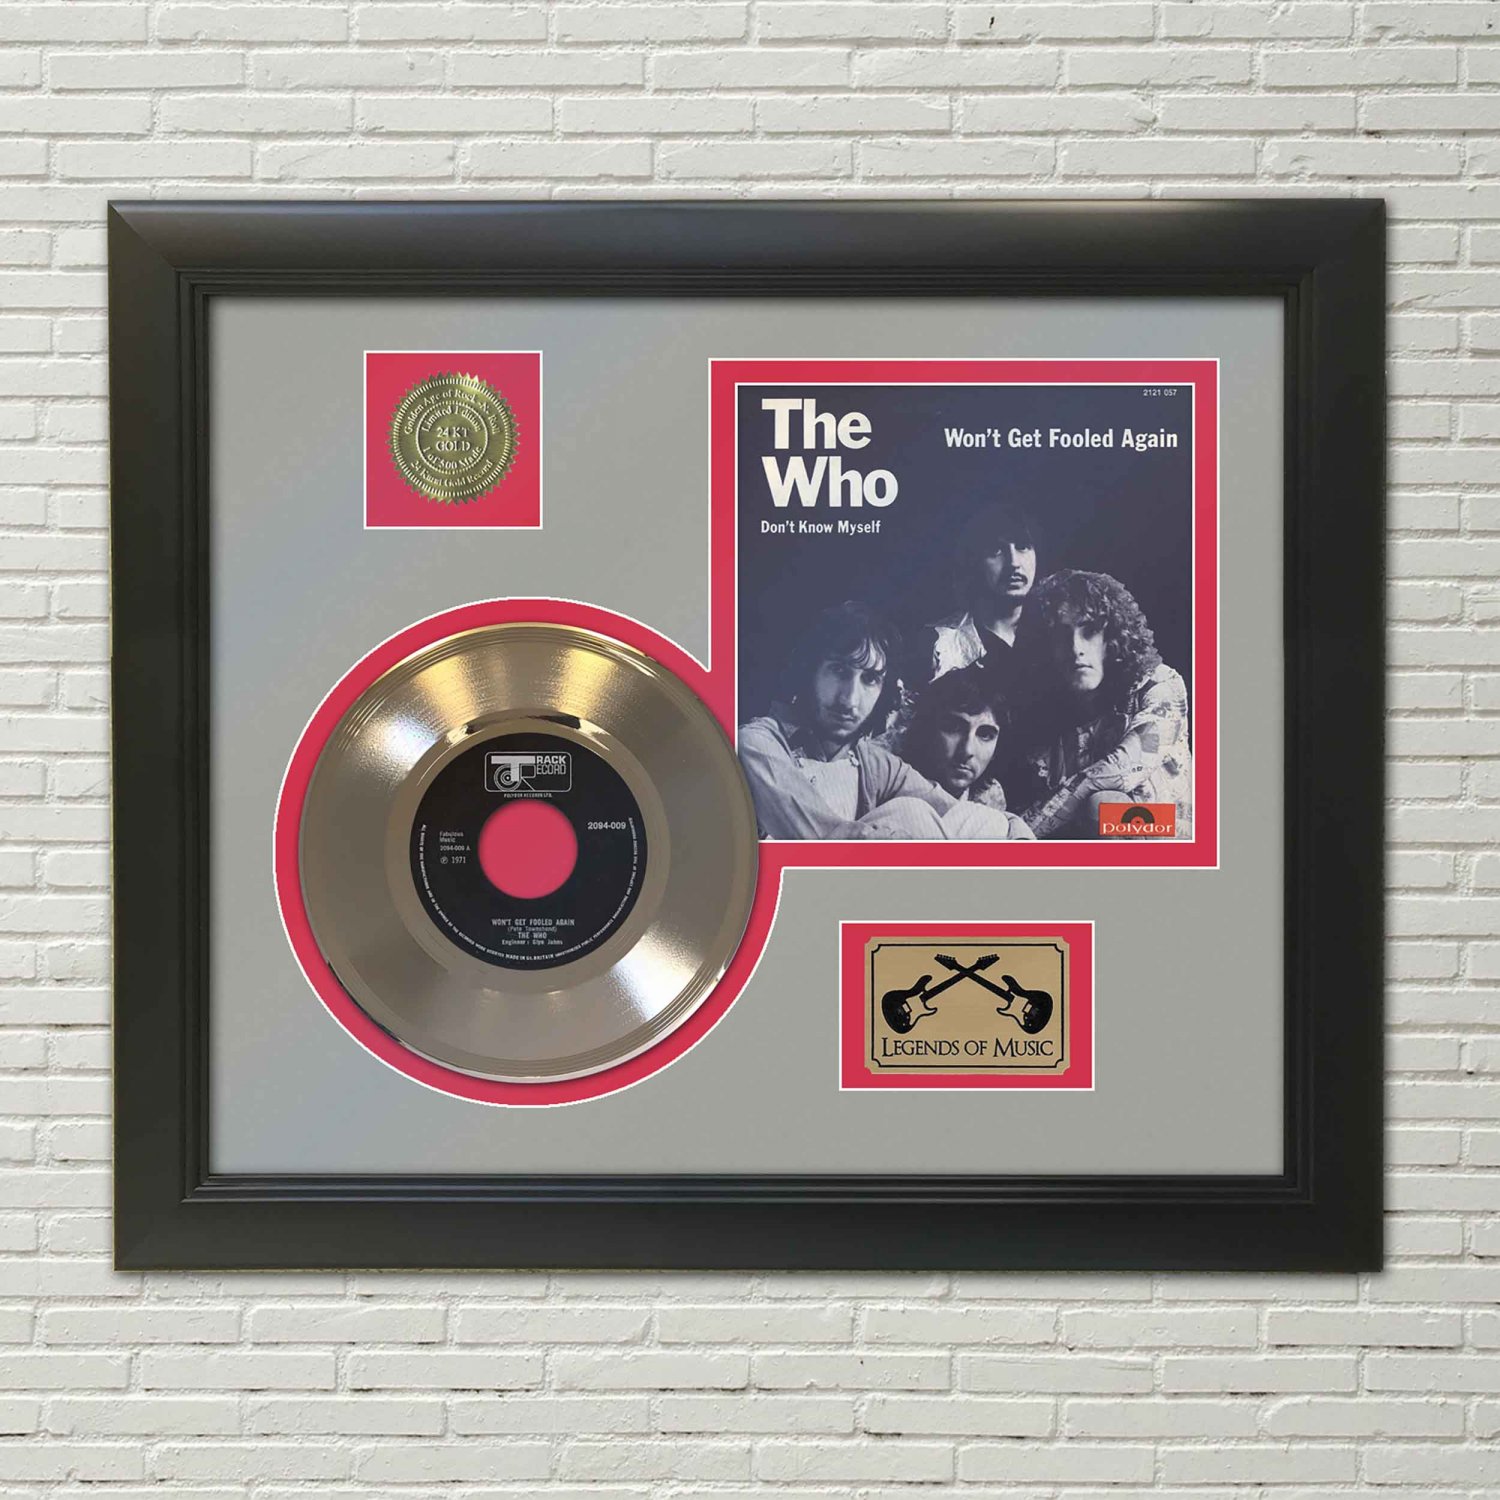 THE WHO "Wonâ��t Get Fooled Again"  Framed Picture Sleeve Gold 45 Record Display